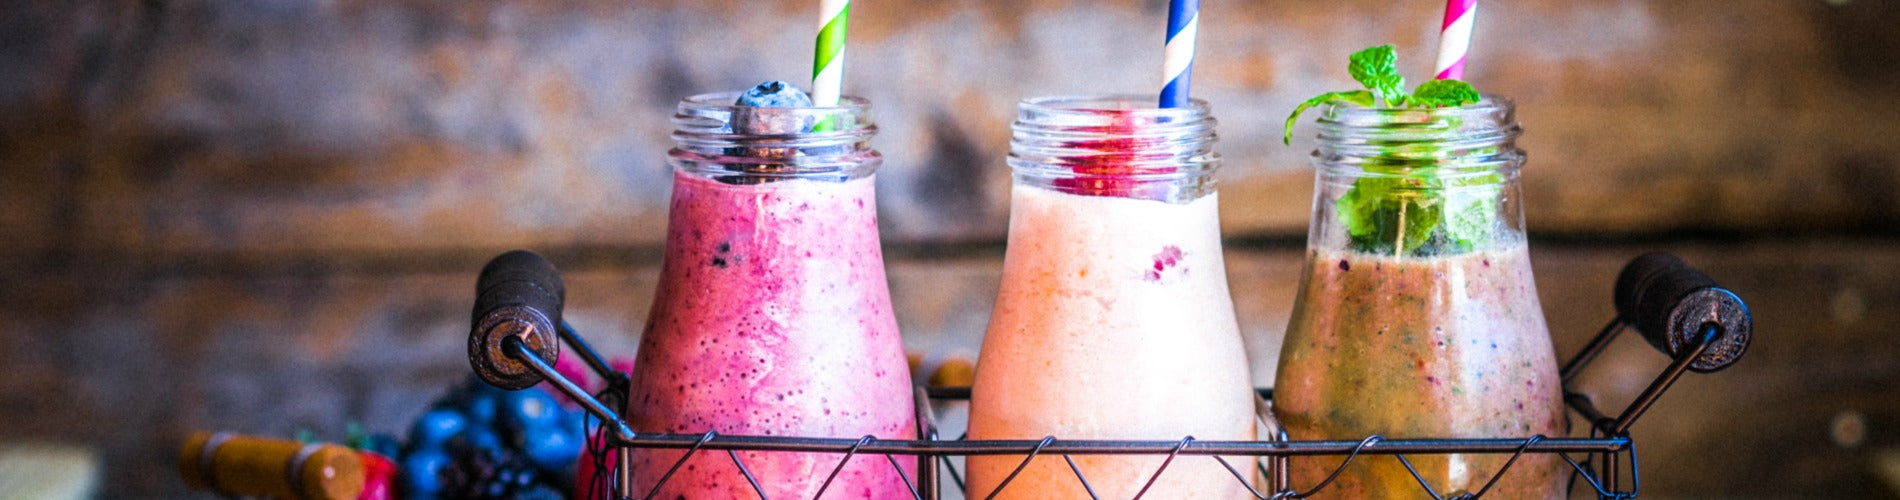 4 Smoothie Recipes that Promote Sweet Dreams